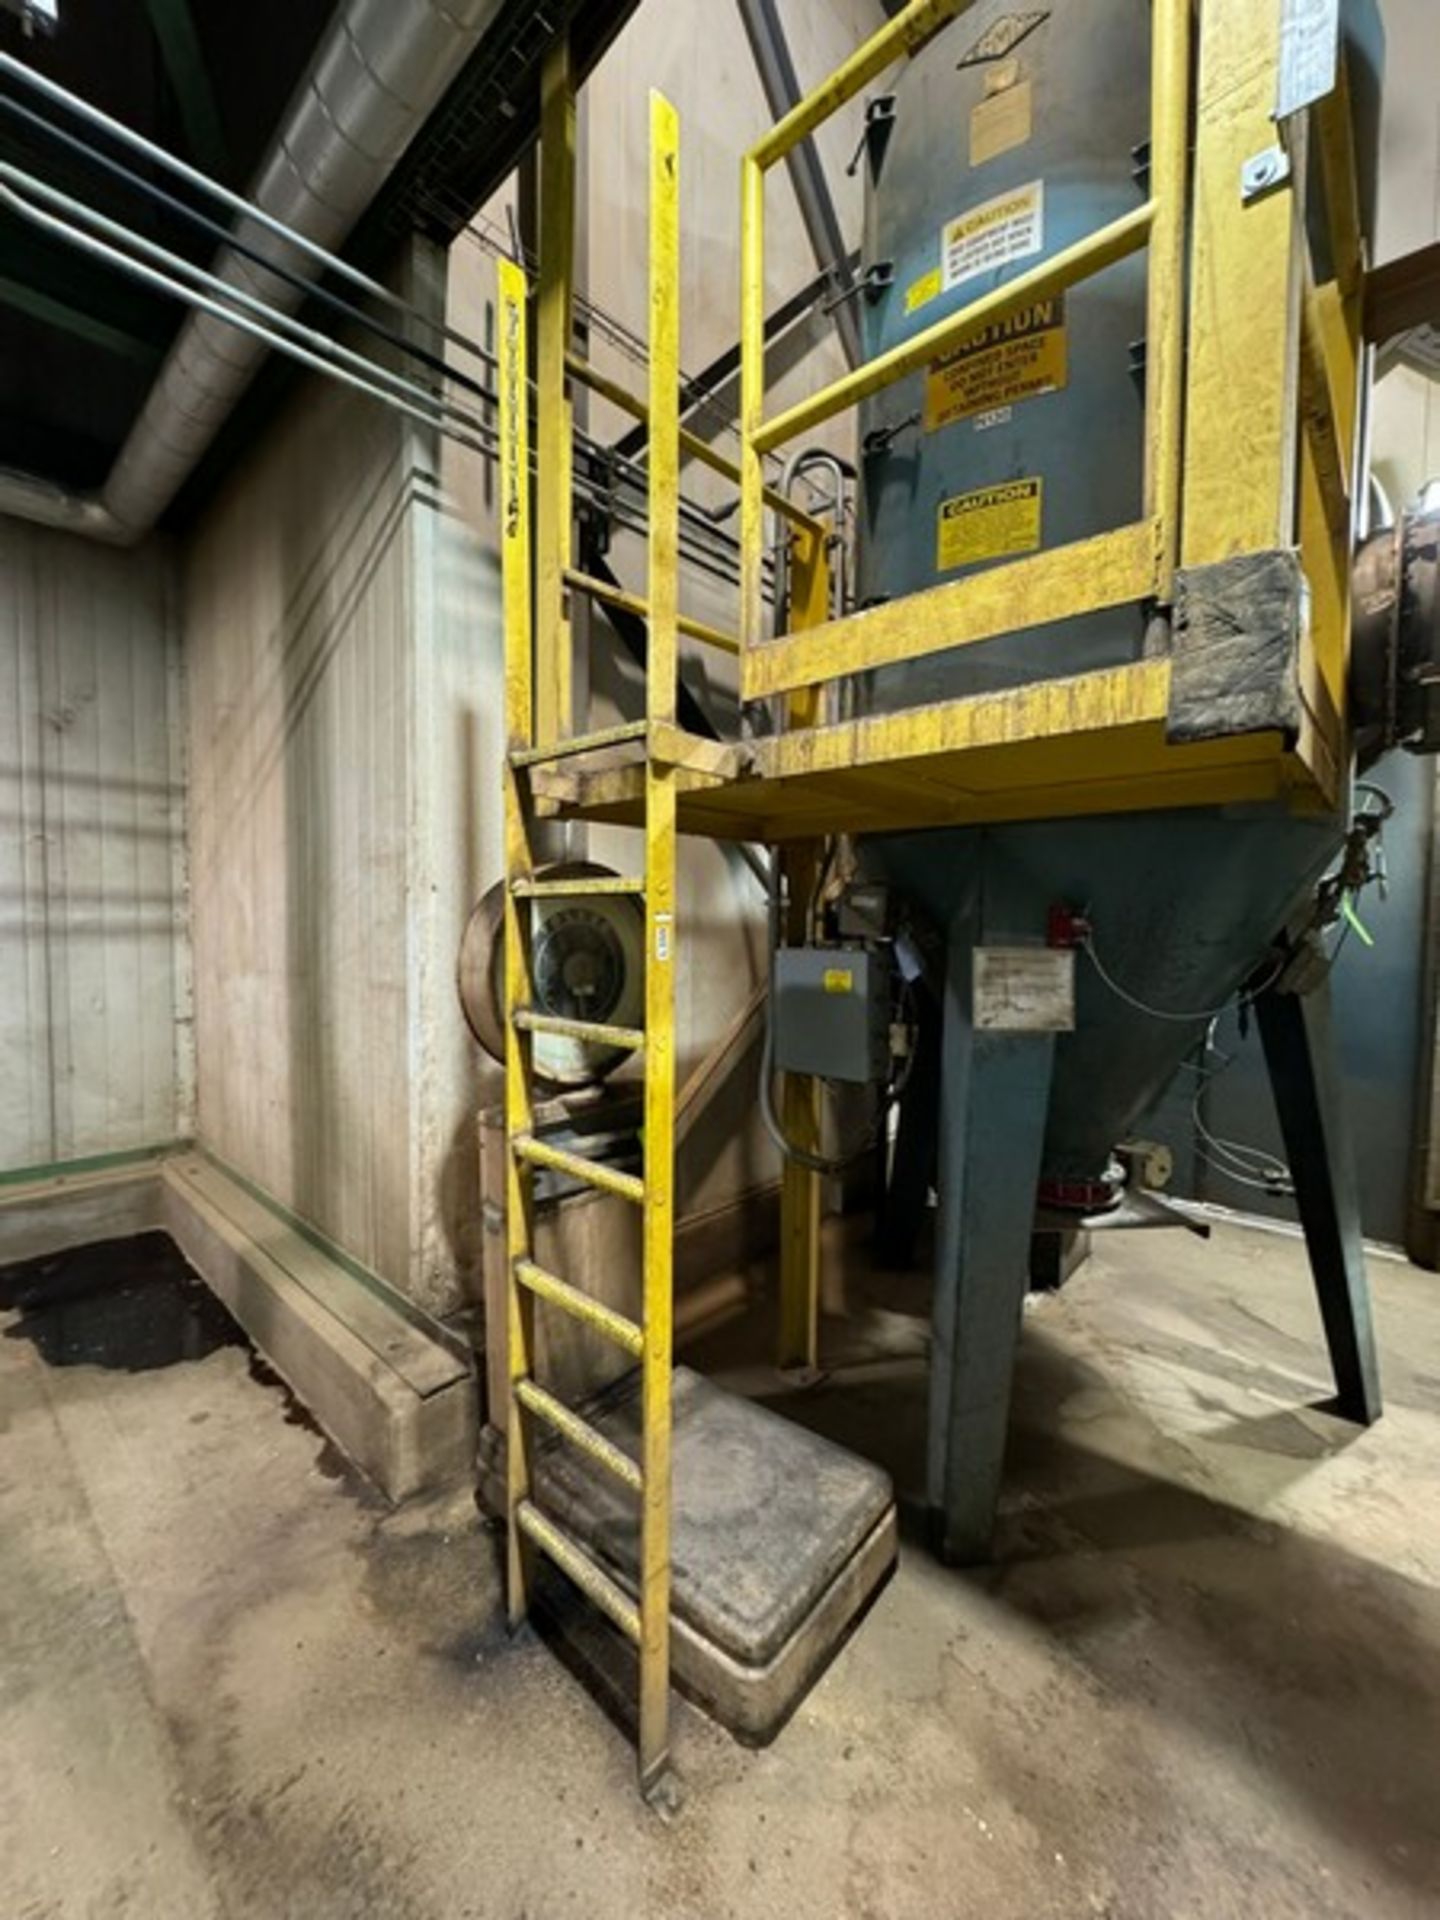 SENCO Dust Collector, M/N DCT-460, S/N 2-75, Includes the Platform & Ladder, with NYB Explosion - Image 16 of 16